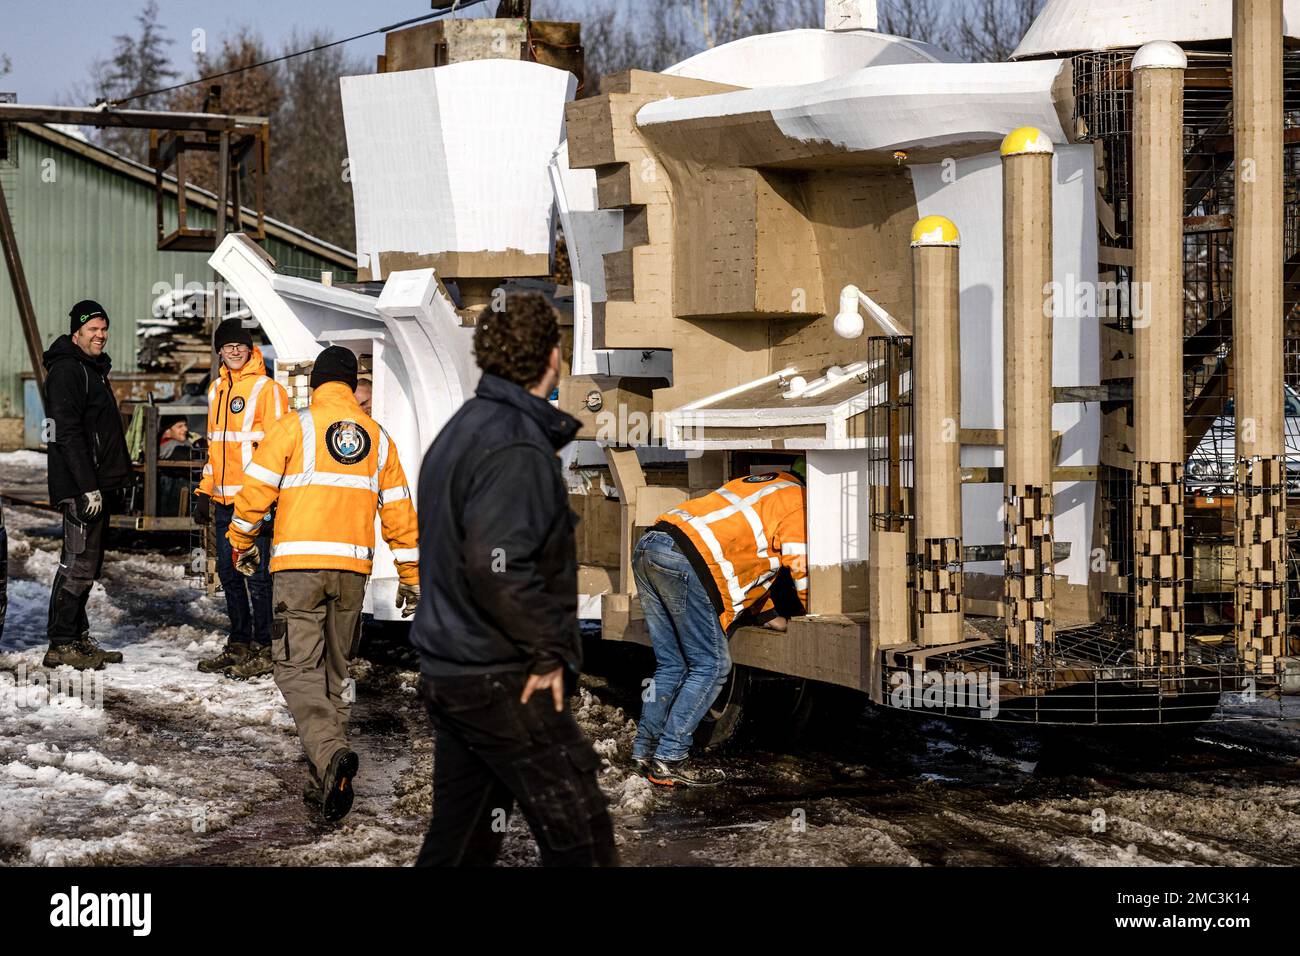 OIRSCHOT - Members of a carnival association practice assembling a float. Carnival is celebrated in the south of the country in February. ANP ROB ENGELAAR netherlands out - belgium out Credit: ANP/Alamy Live News Stock Photo